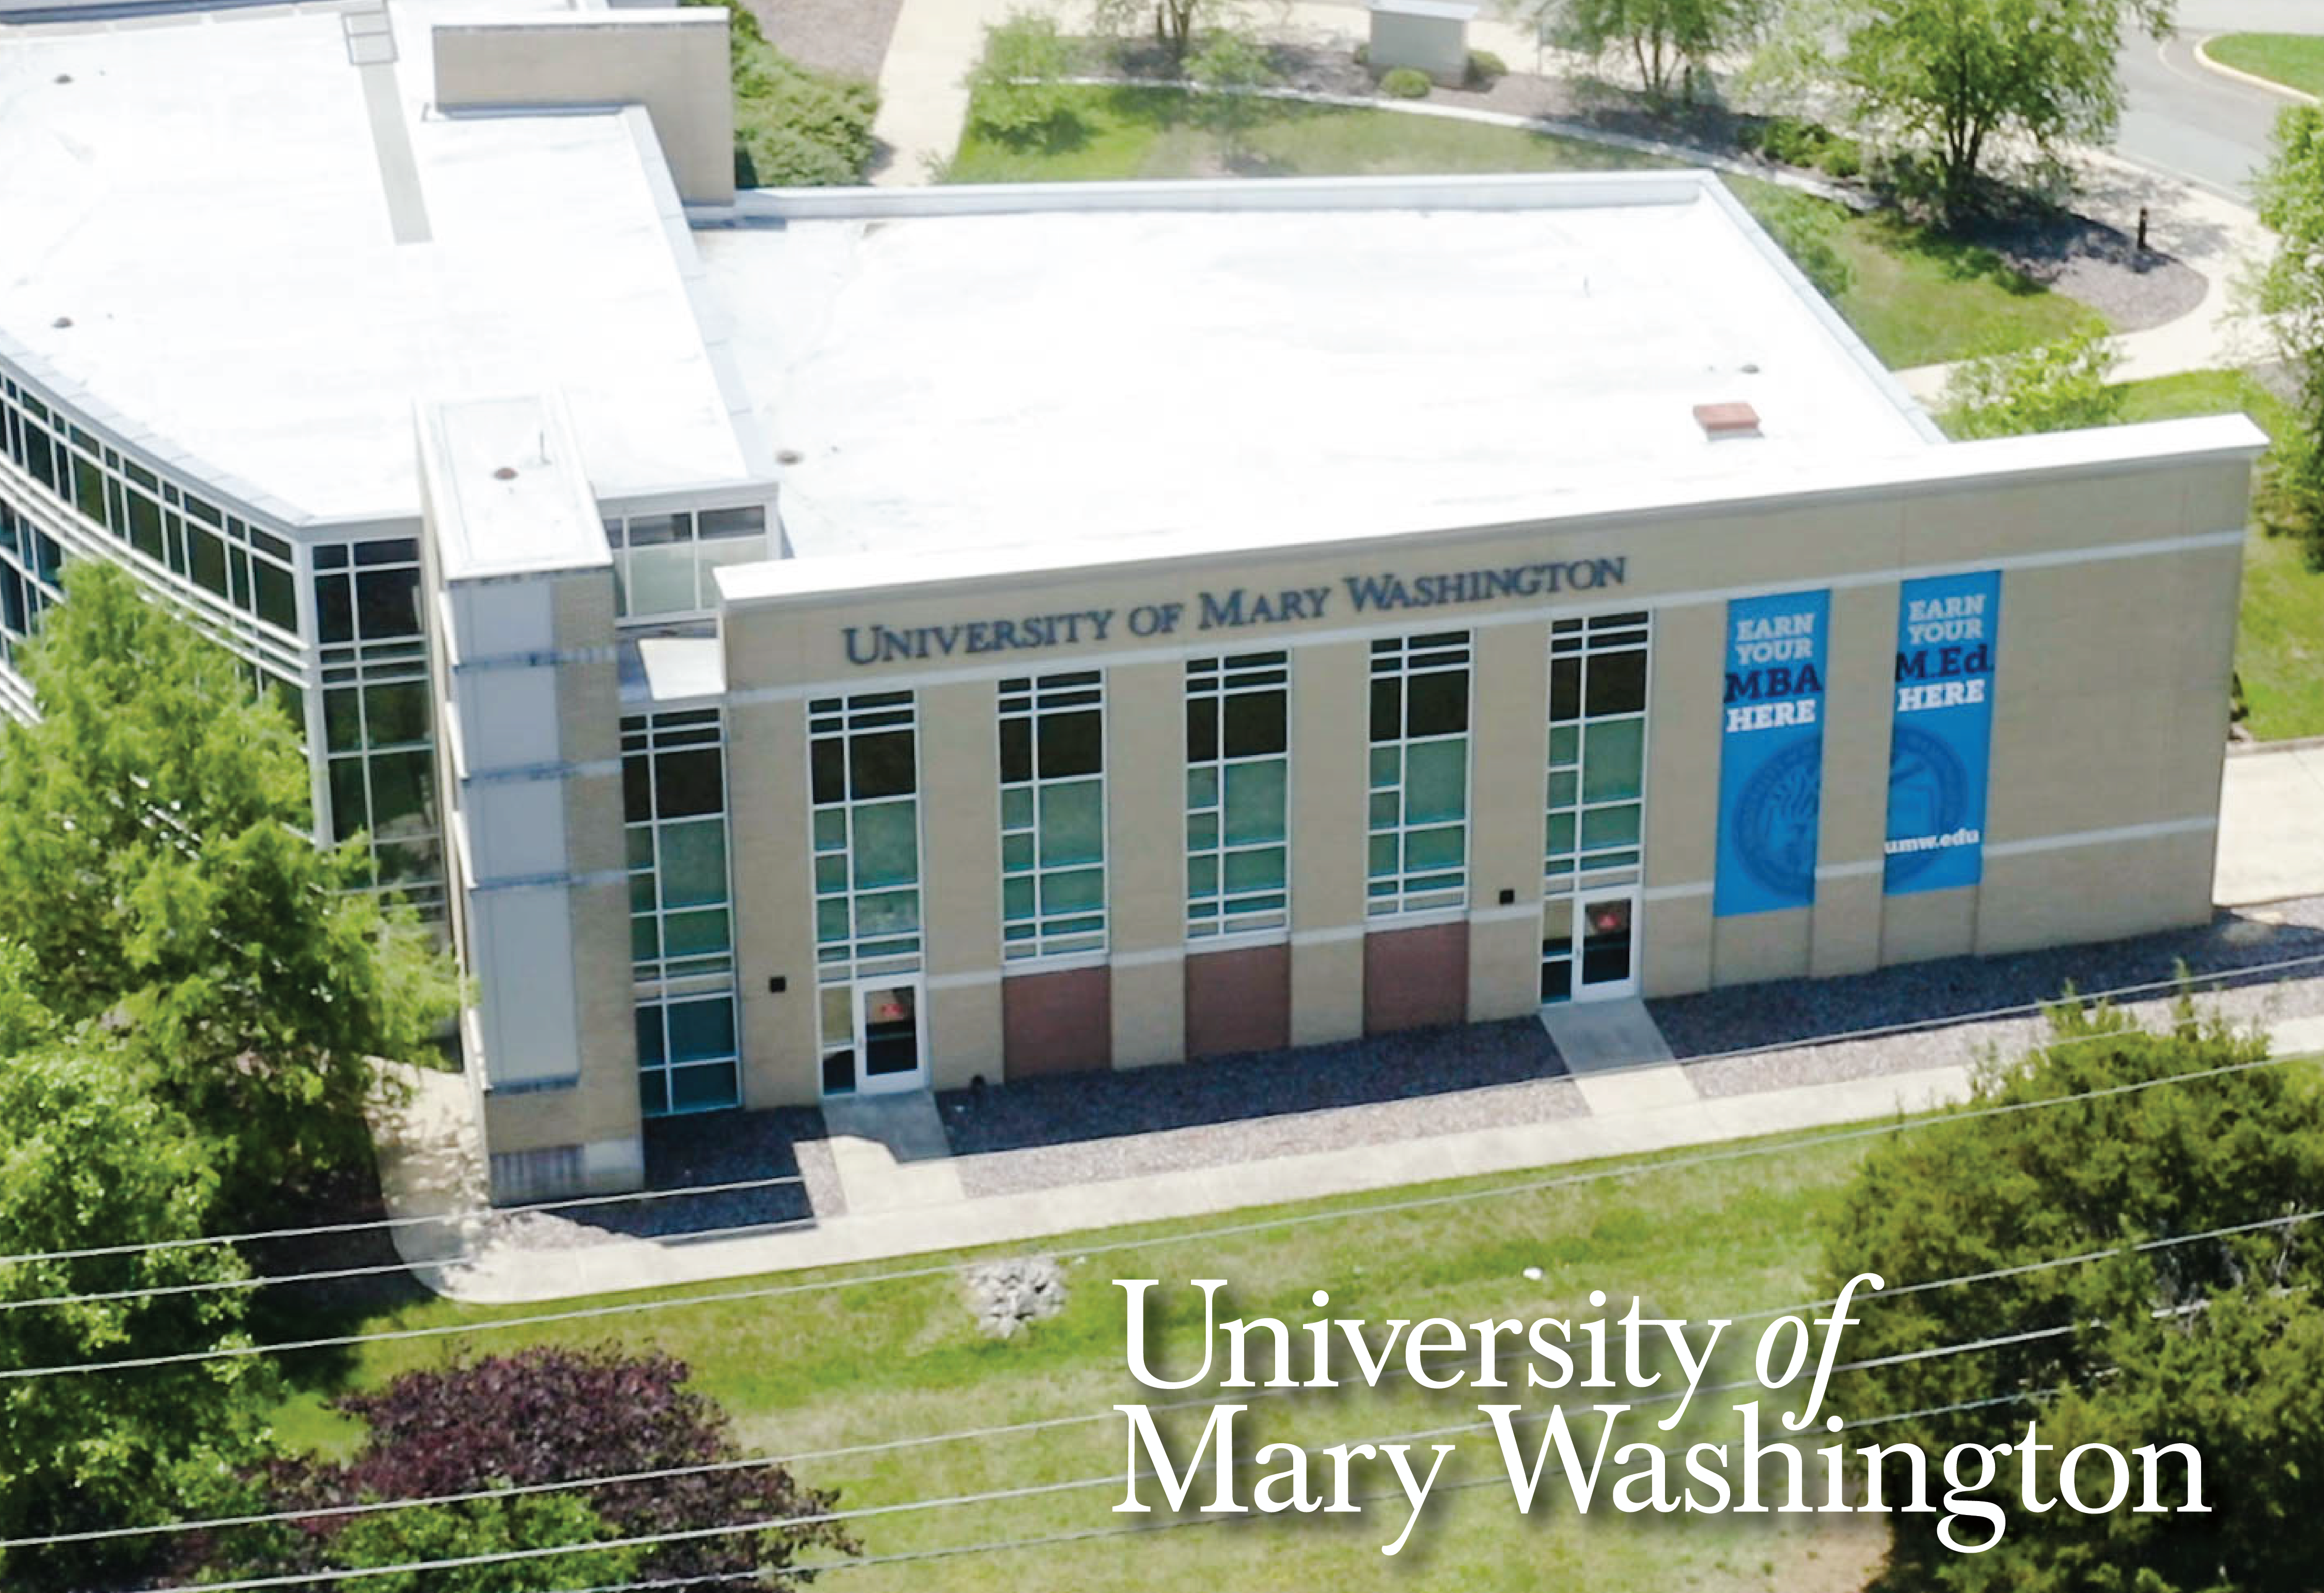 To confirm your intent to attend Mary Washington, you can either pay online or send a check to pay your graduate program enrollment deposit.